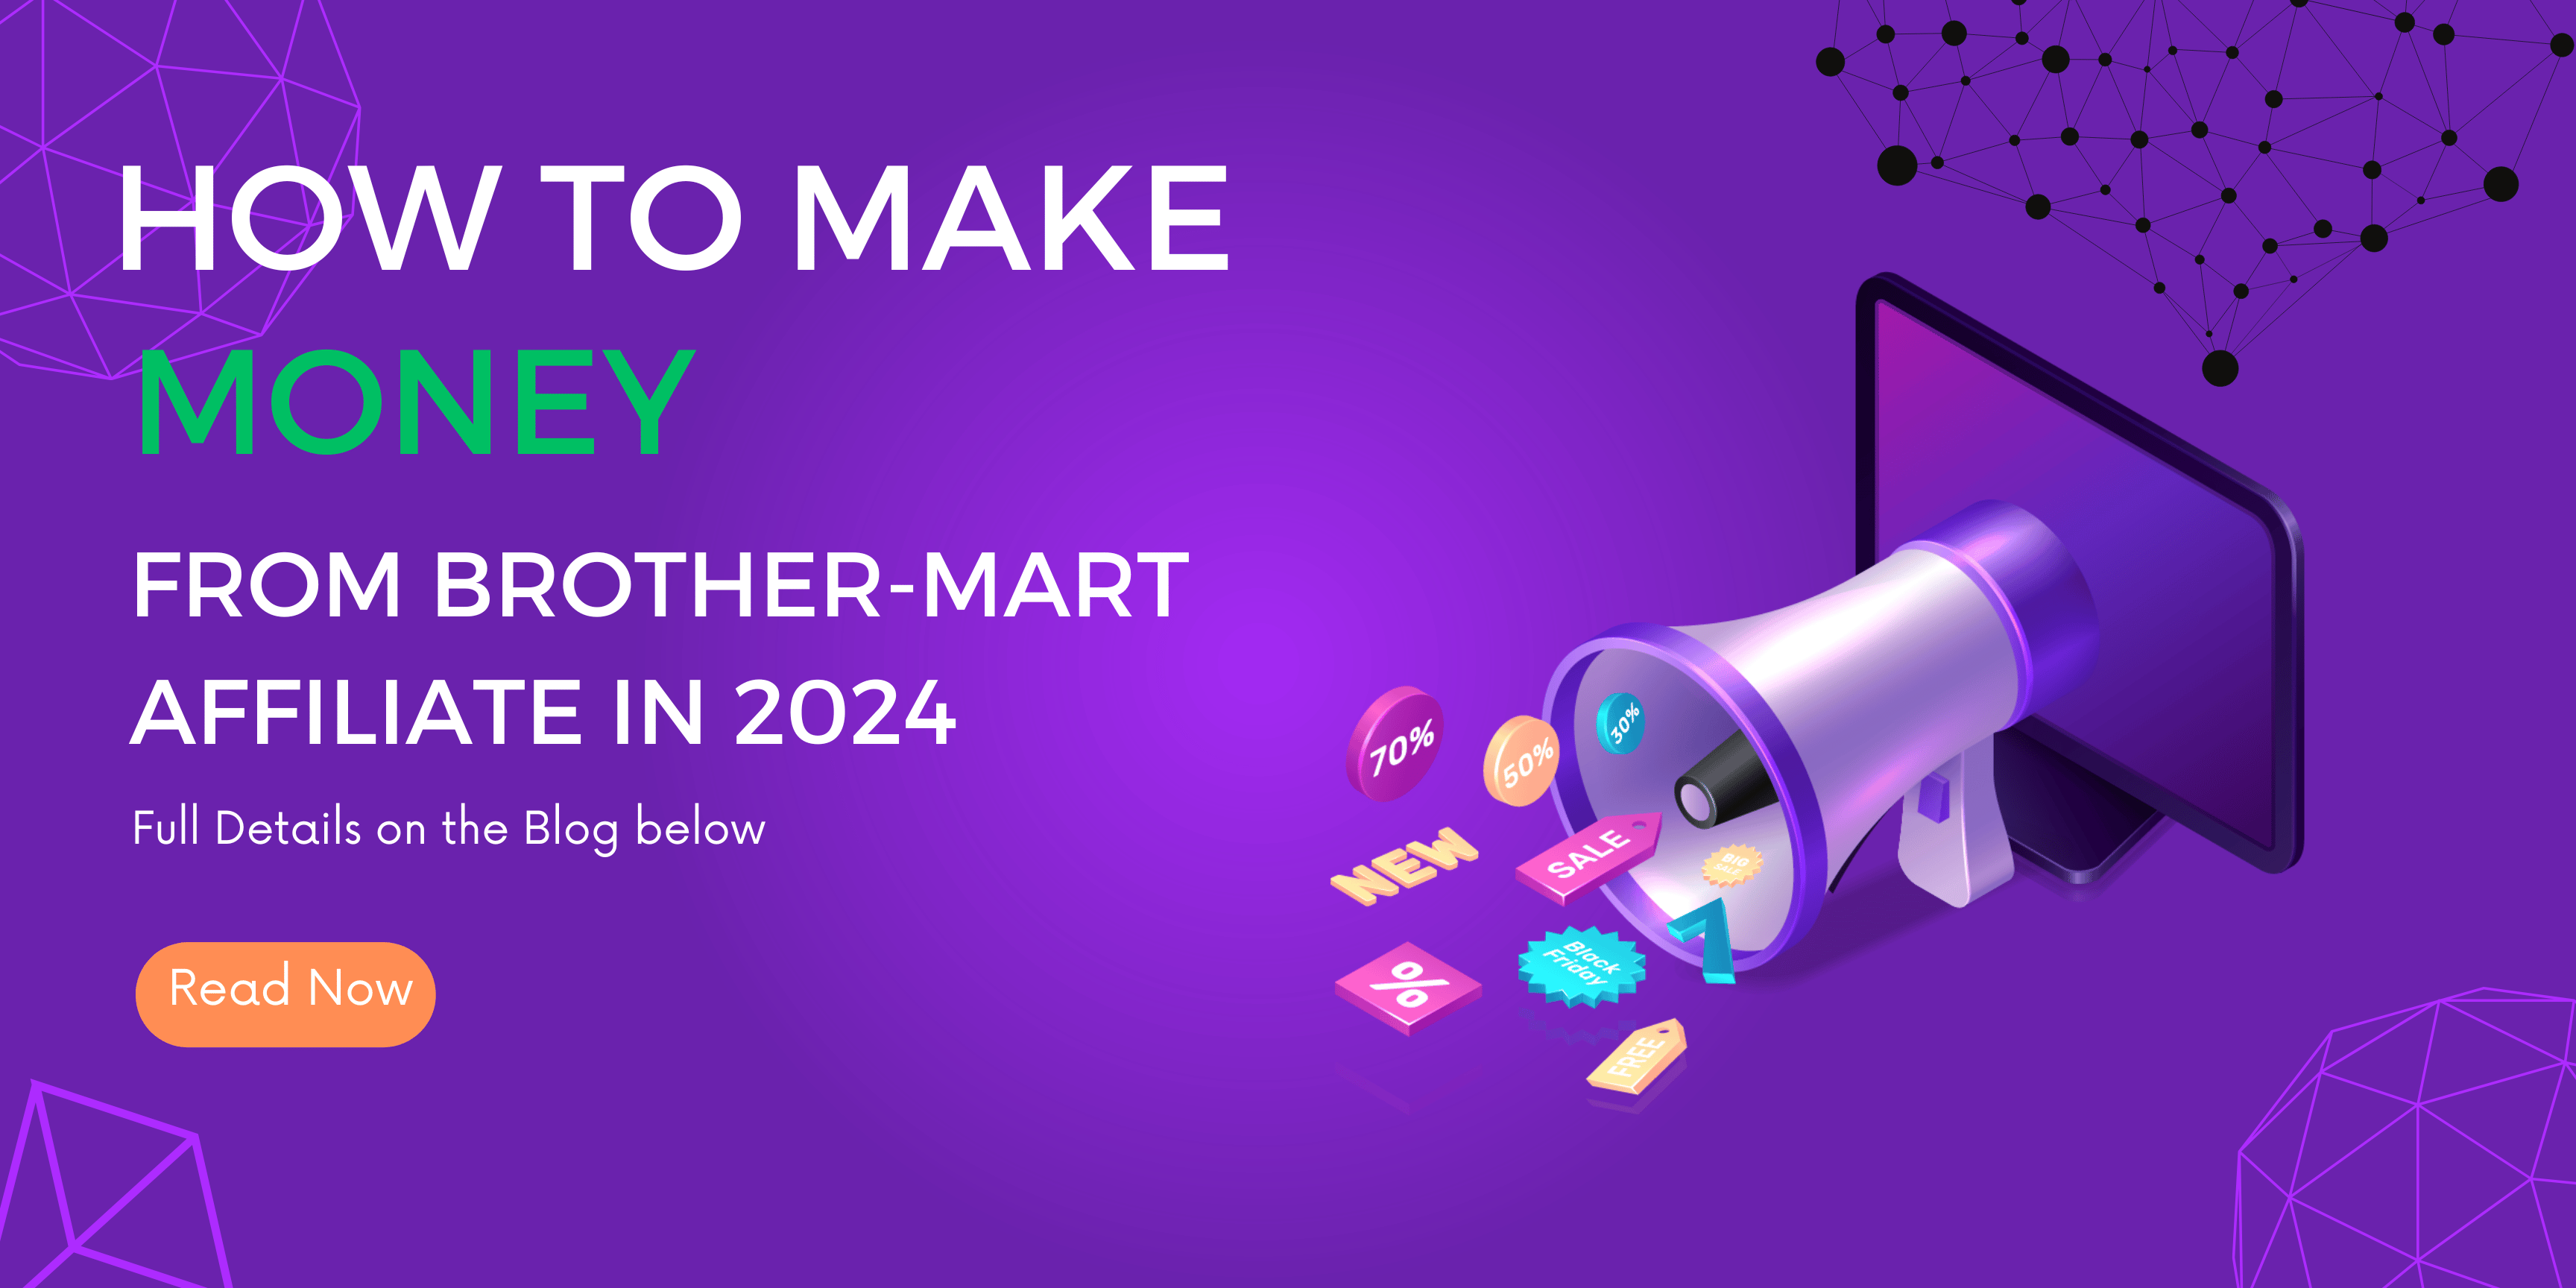 How to make money from Brother-mart affiliate in 2024?